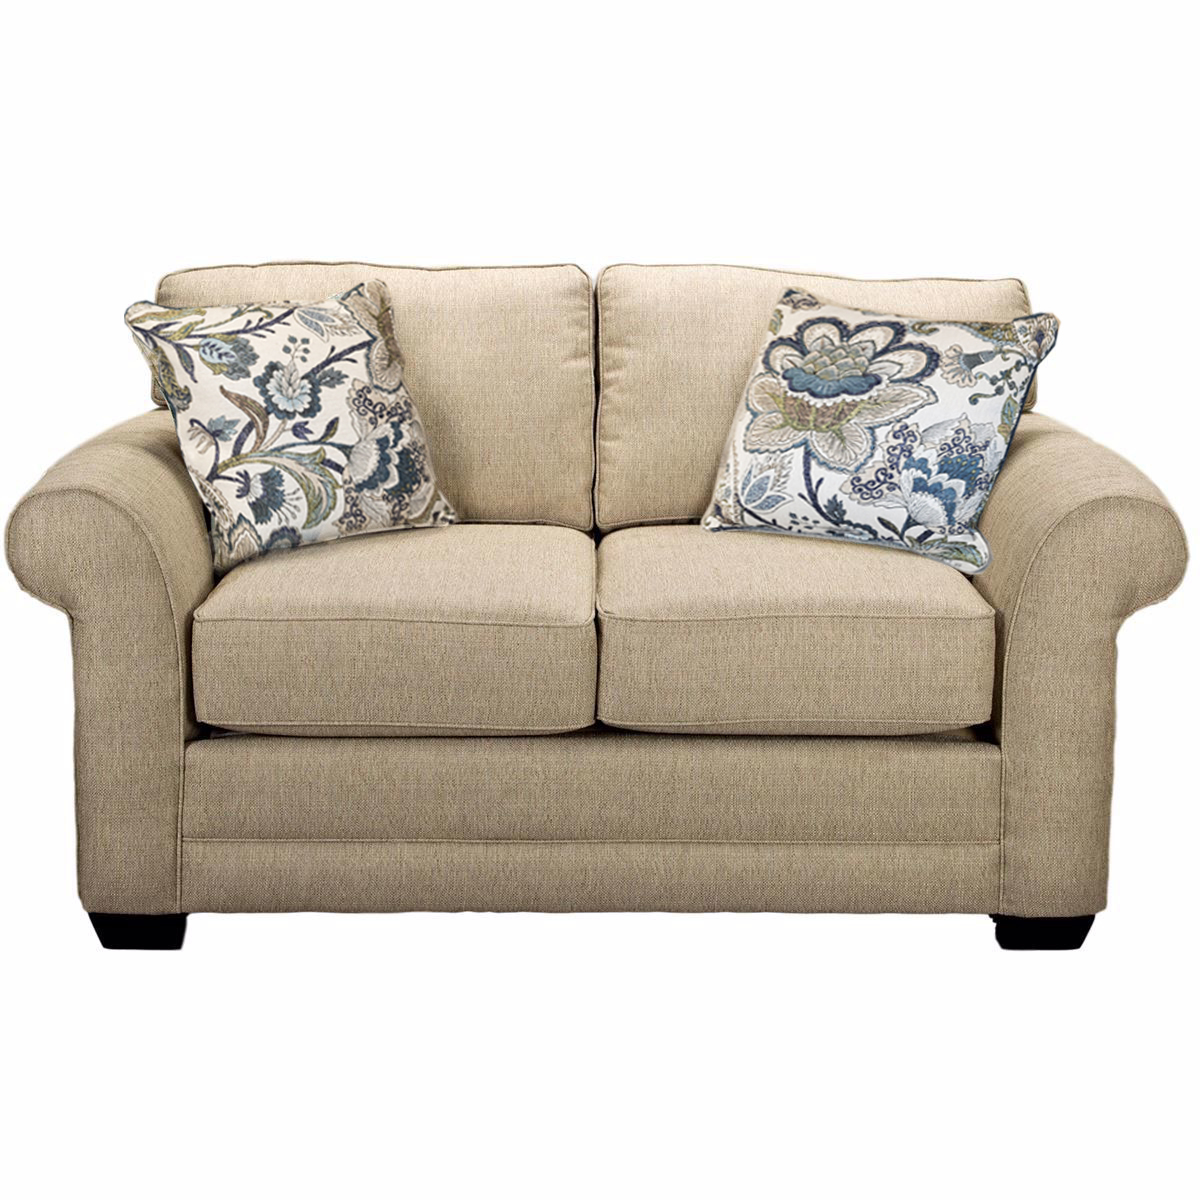 Picture of Brantley Loveseat